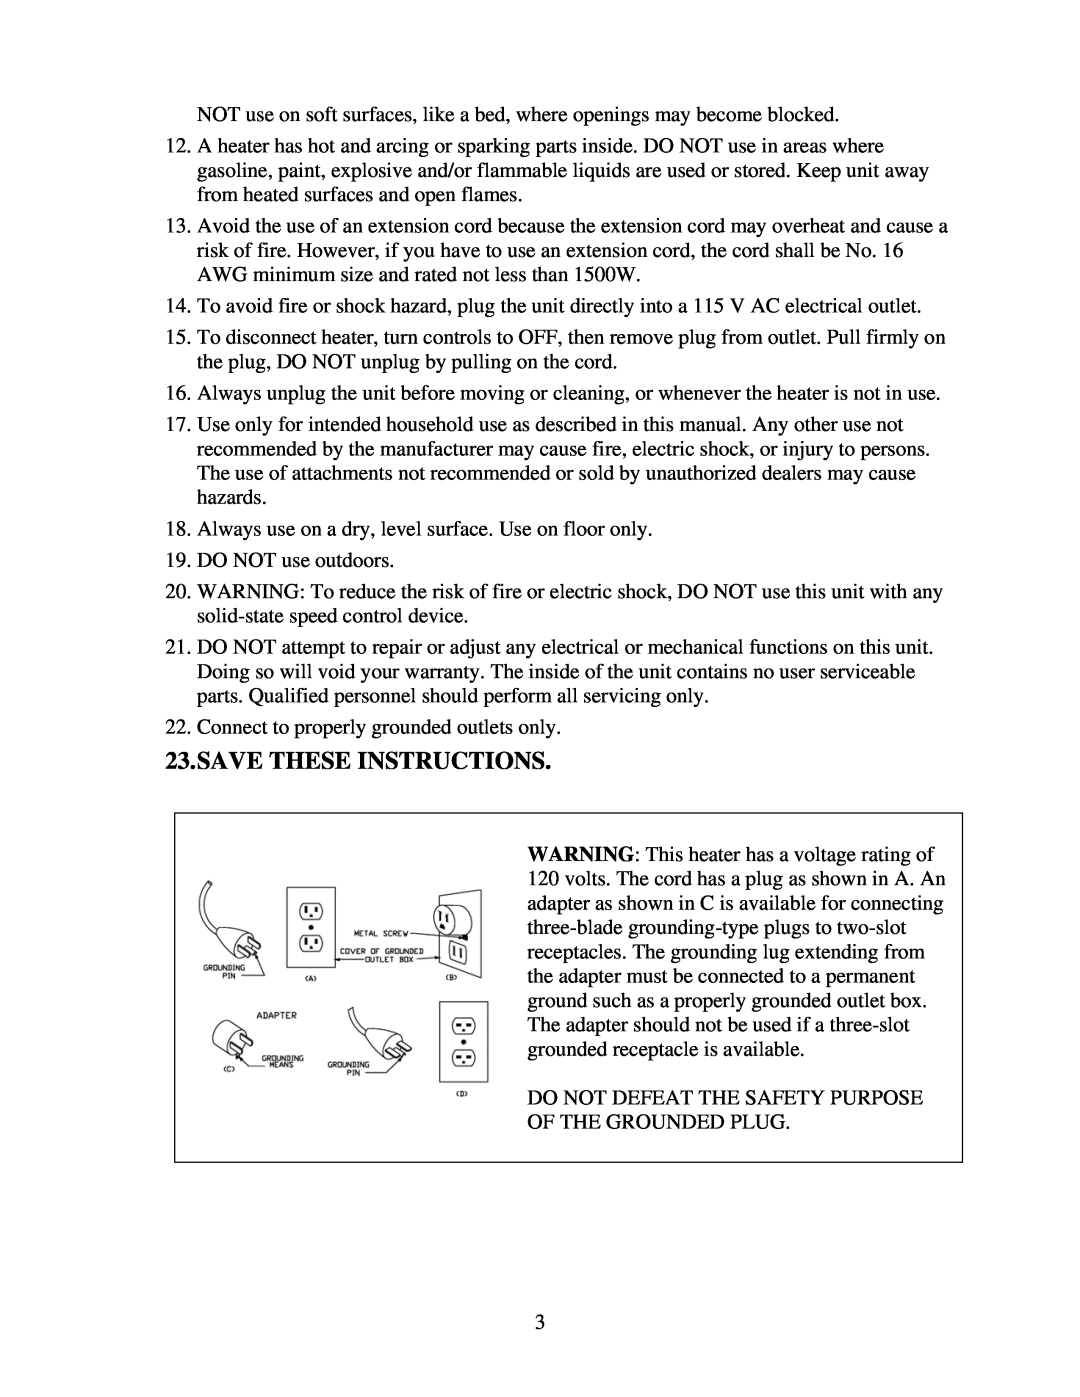 Soleus Air HM1-10R-32 owner manual Save These Instructions 